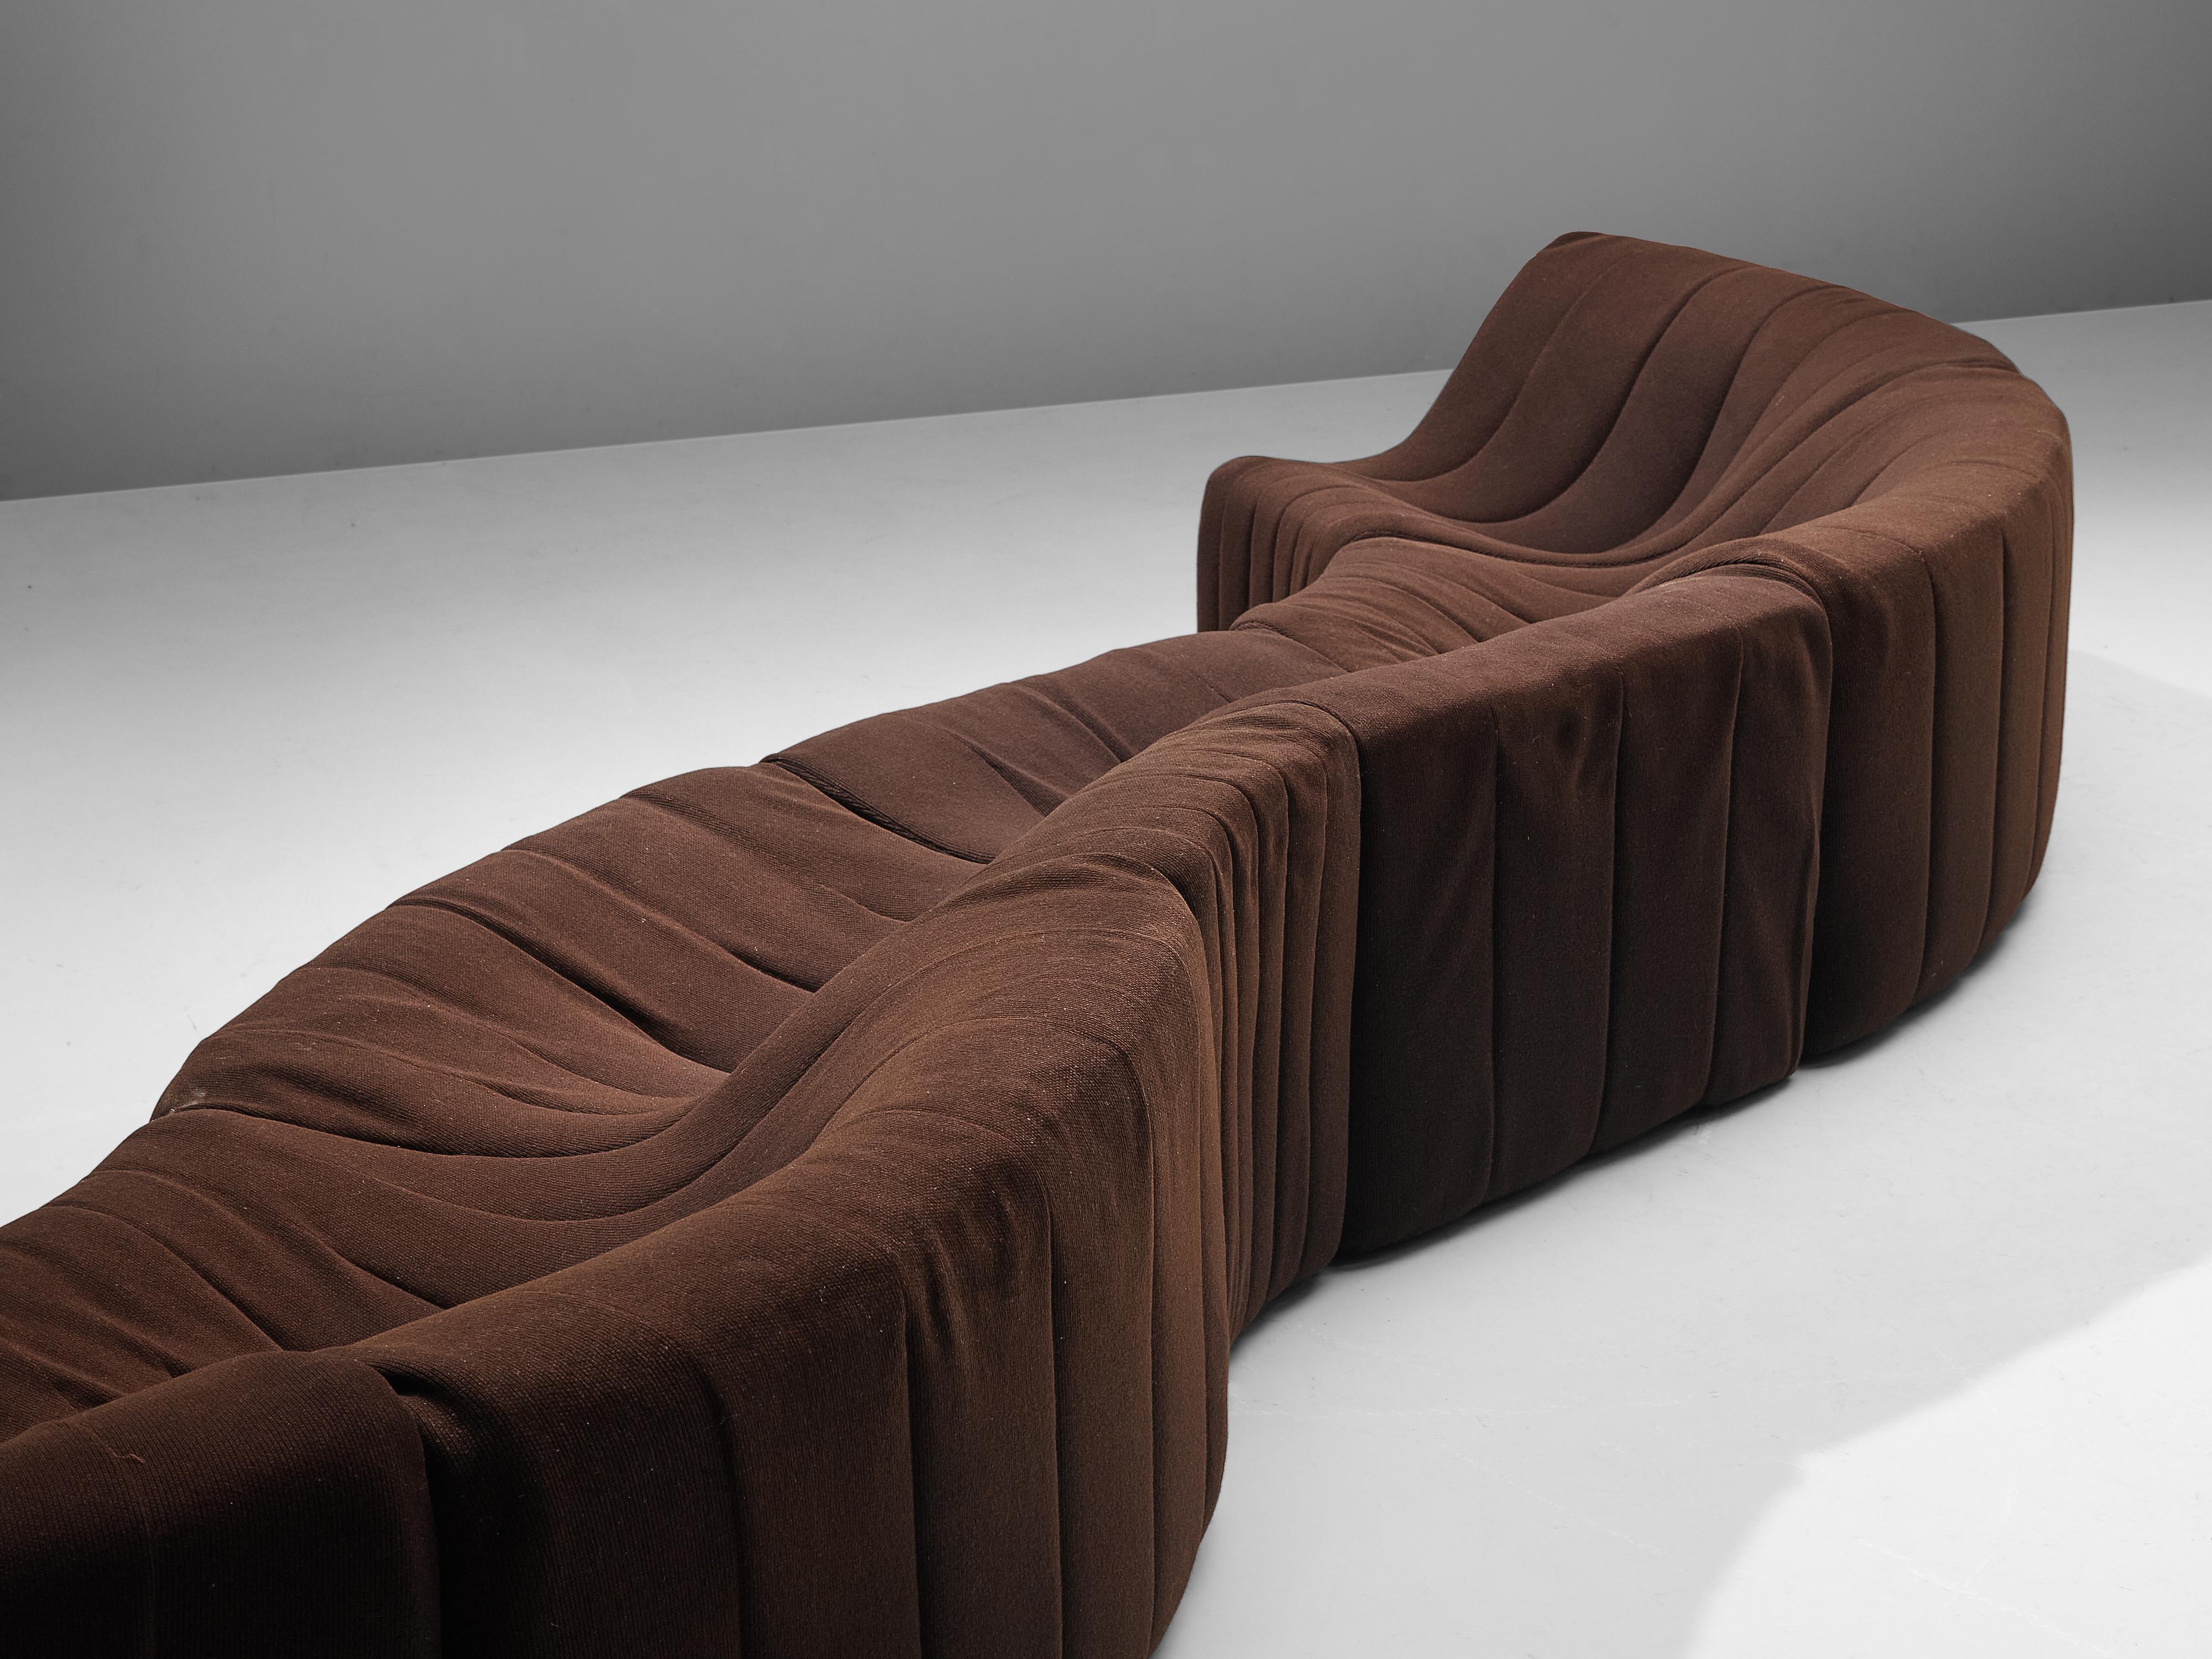 Kwok Hoi Chan for Steiner´Chromatic´ Modular Sofa in Brown Upholstery 2